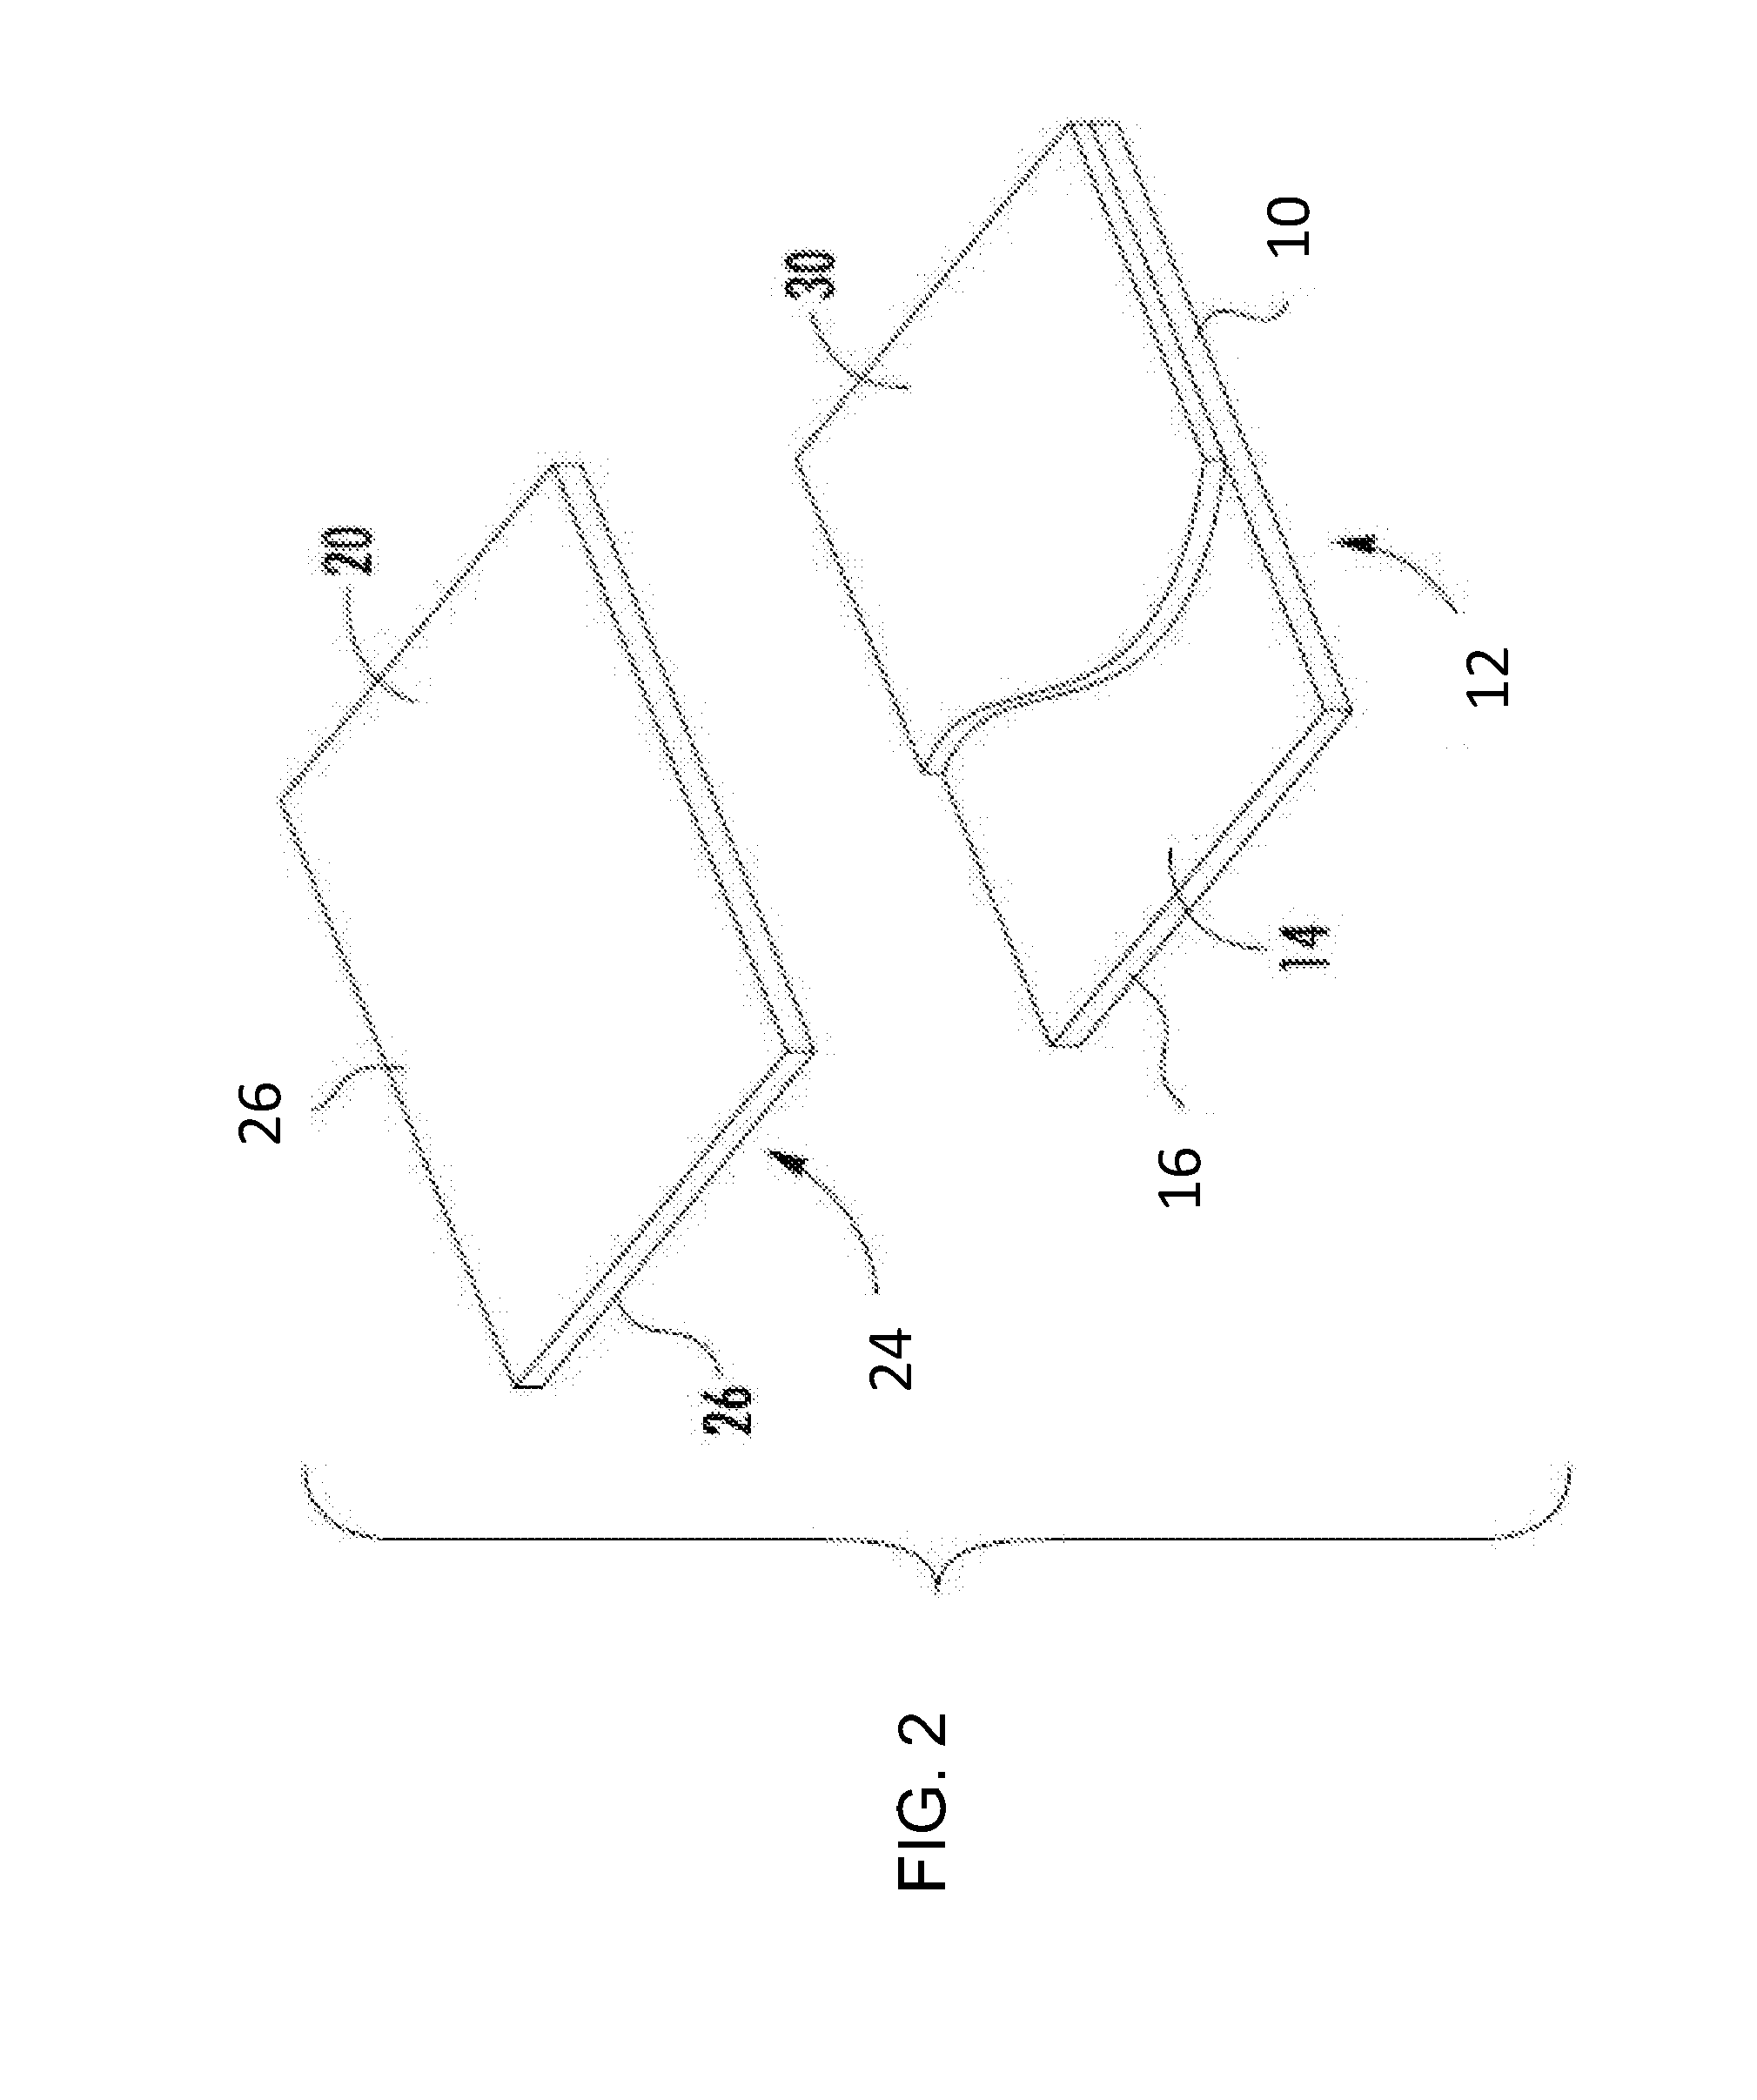 Facilitated Processing for Controlling Bonding Between Sheet and Carrier